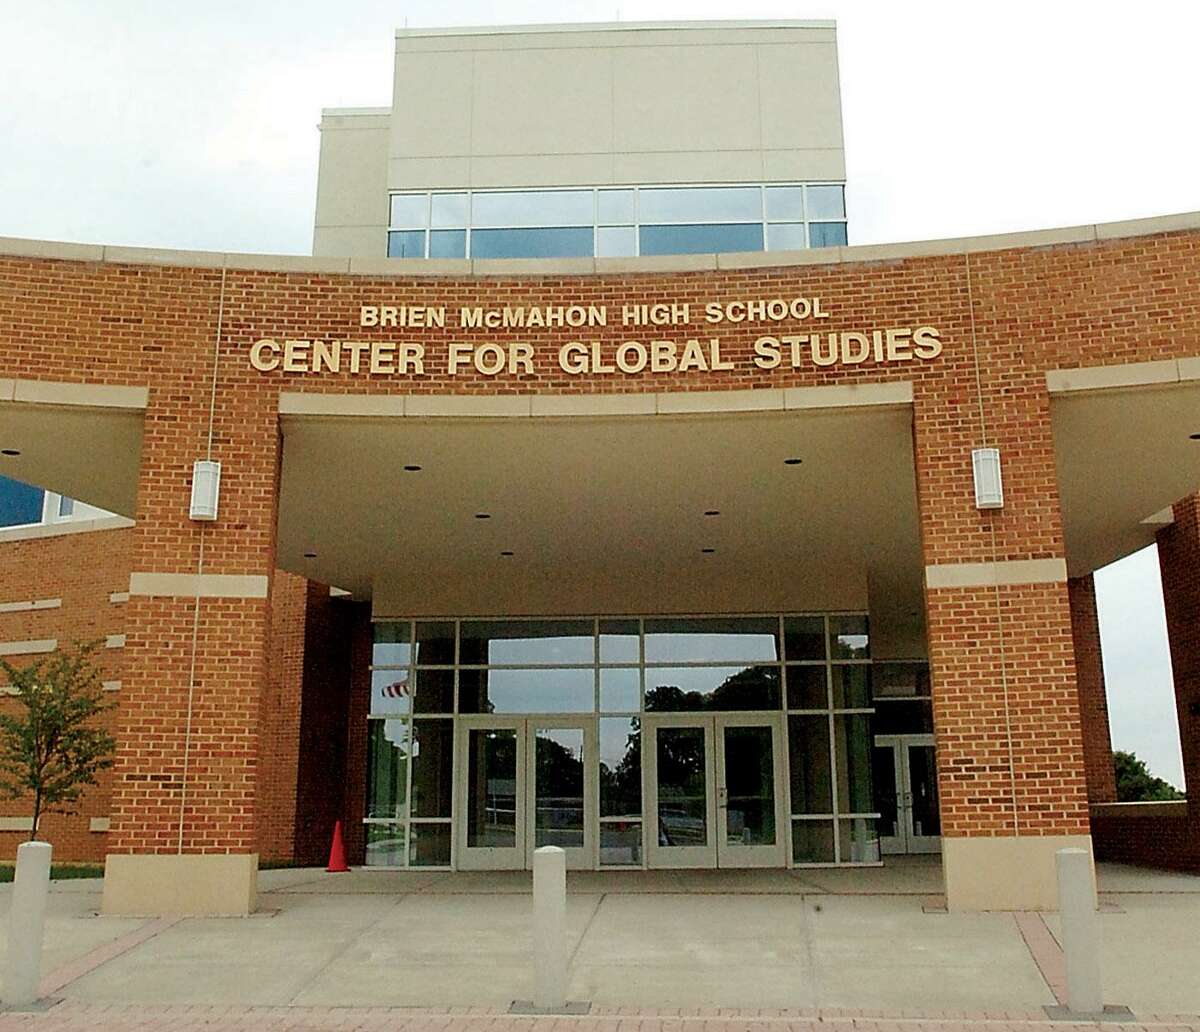 Norwalk’s Center for Global Studies occupies a section of the west wing of Brien McMahon High School.